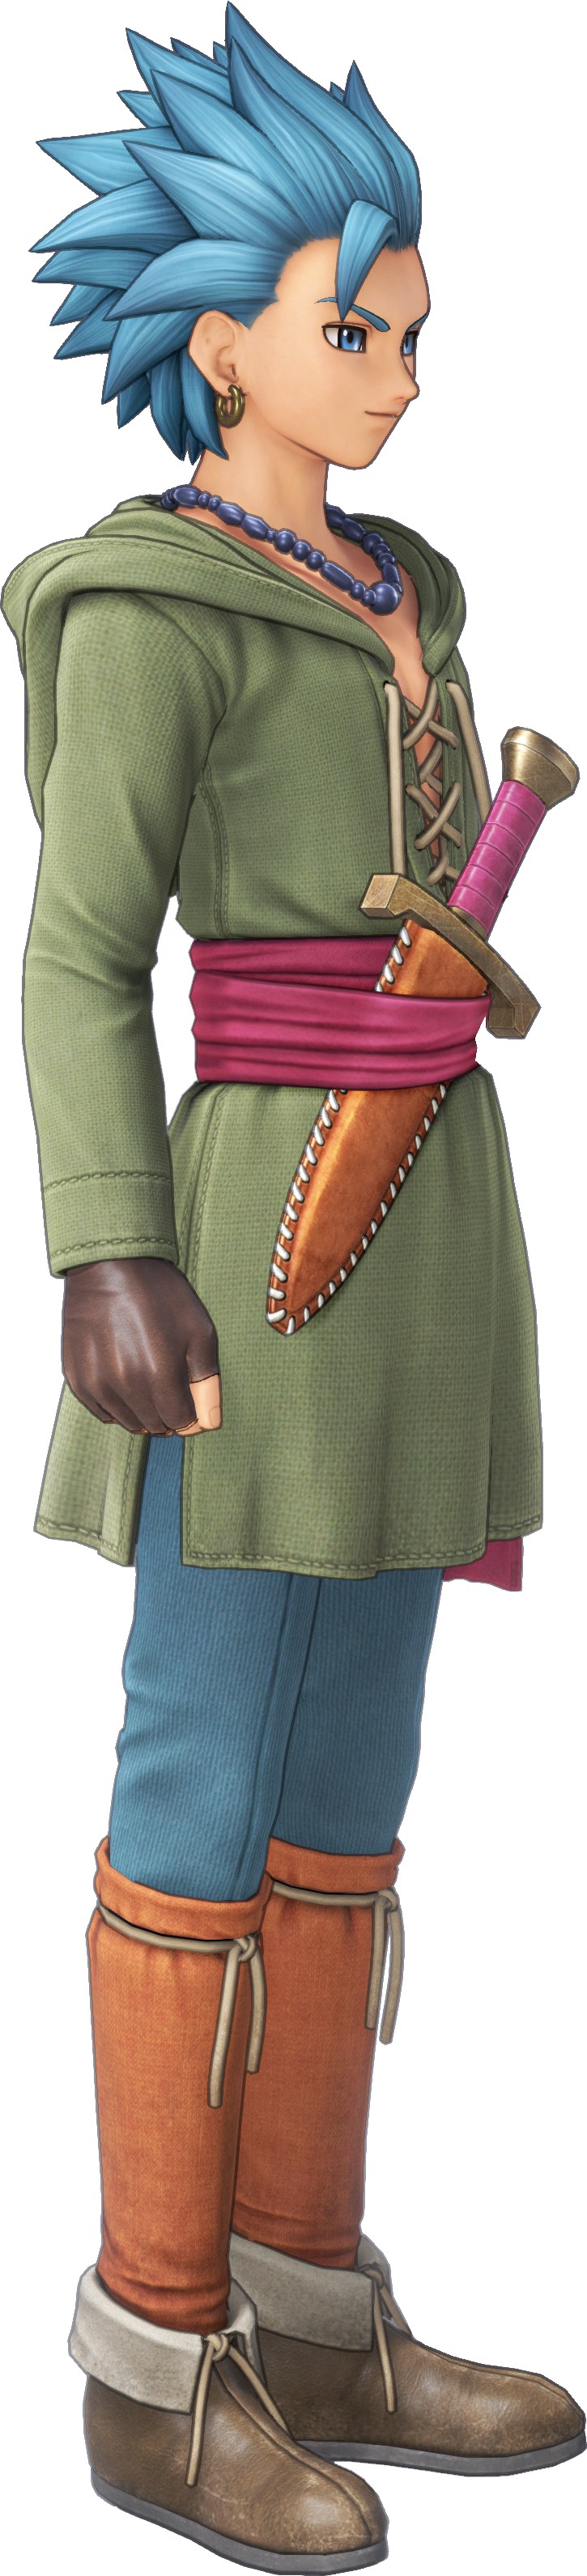 Dragon Quest XI Echoes of an Elusive Age art 040